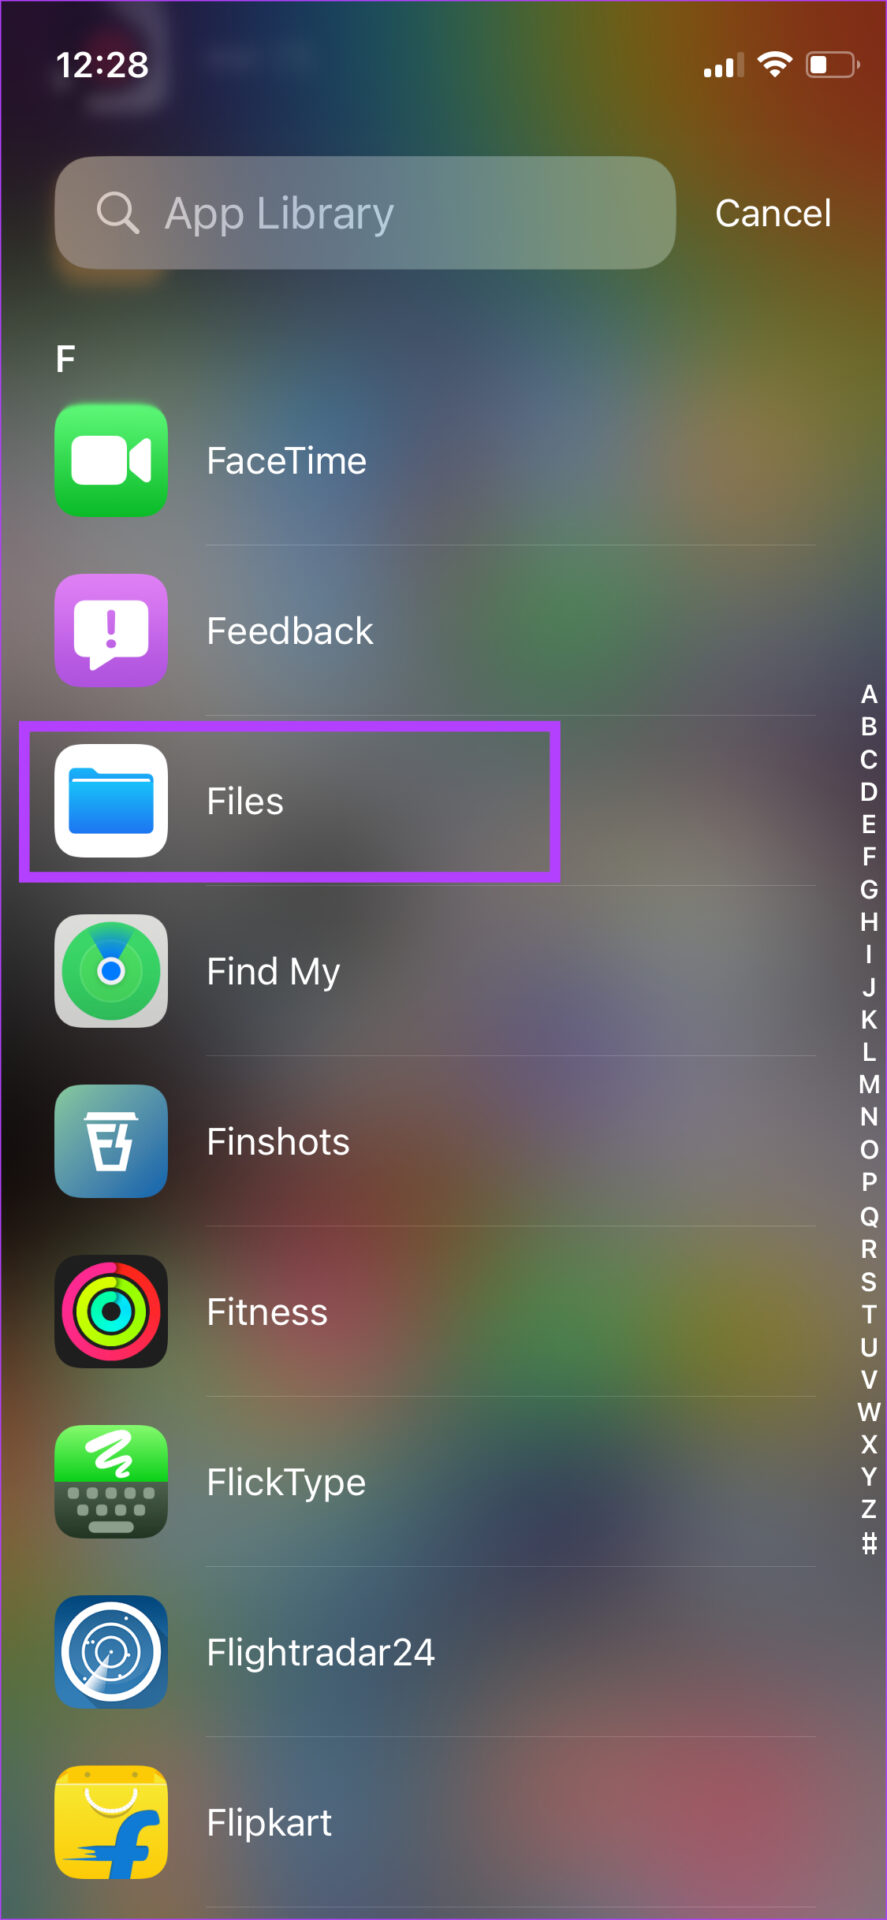 Open files app on your iPhone